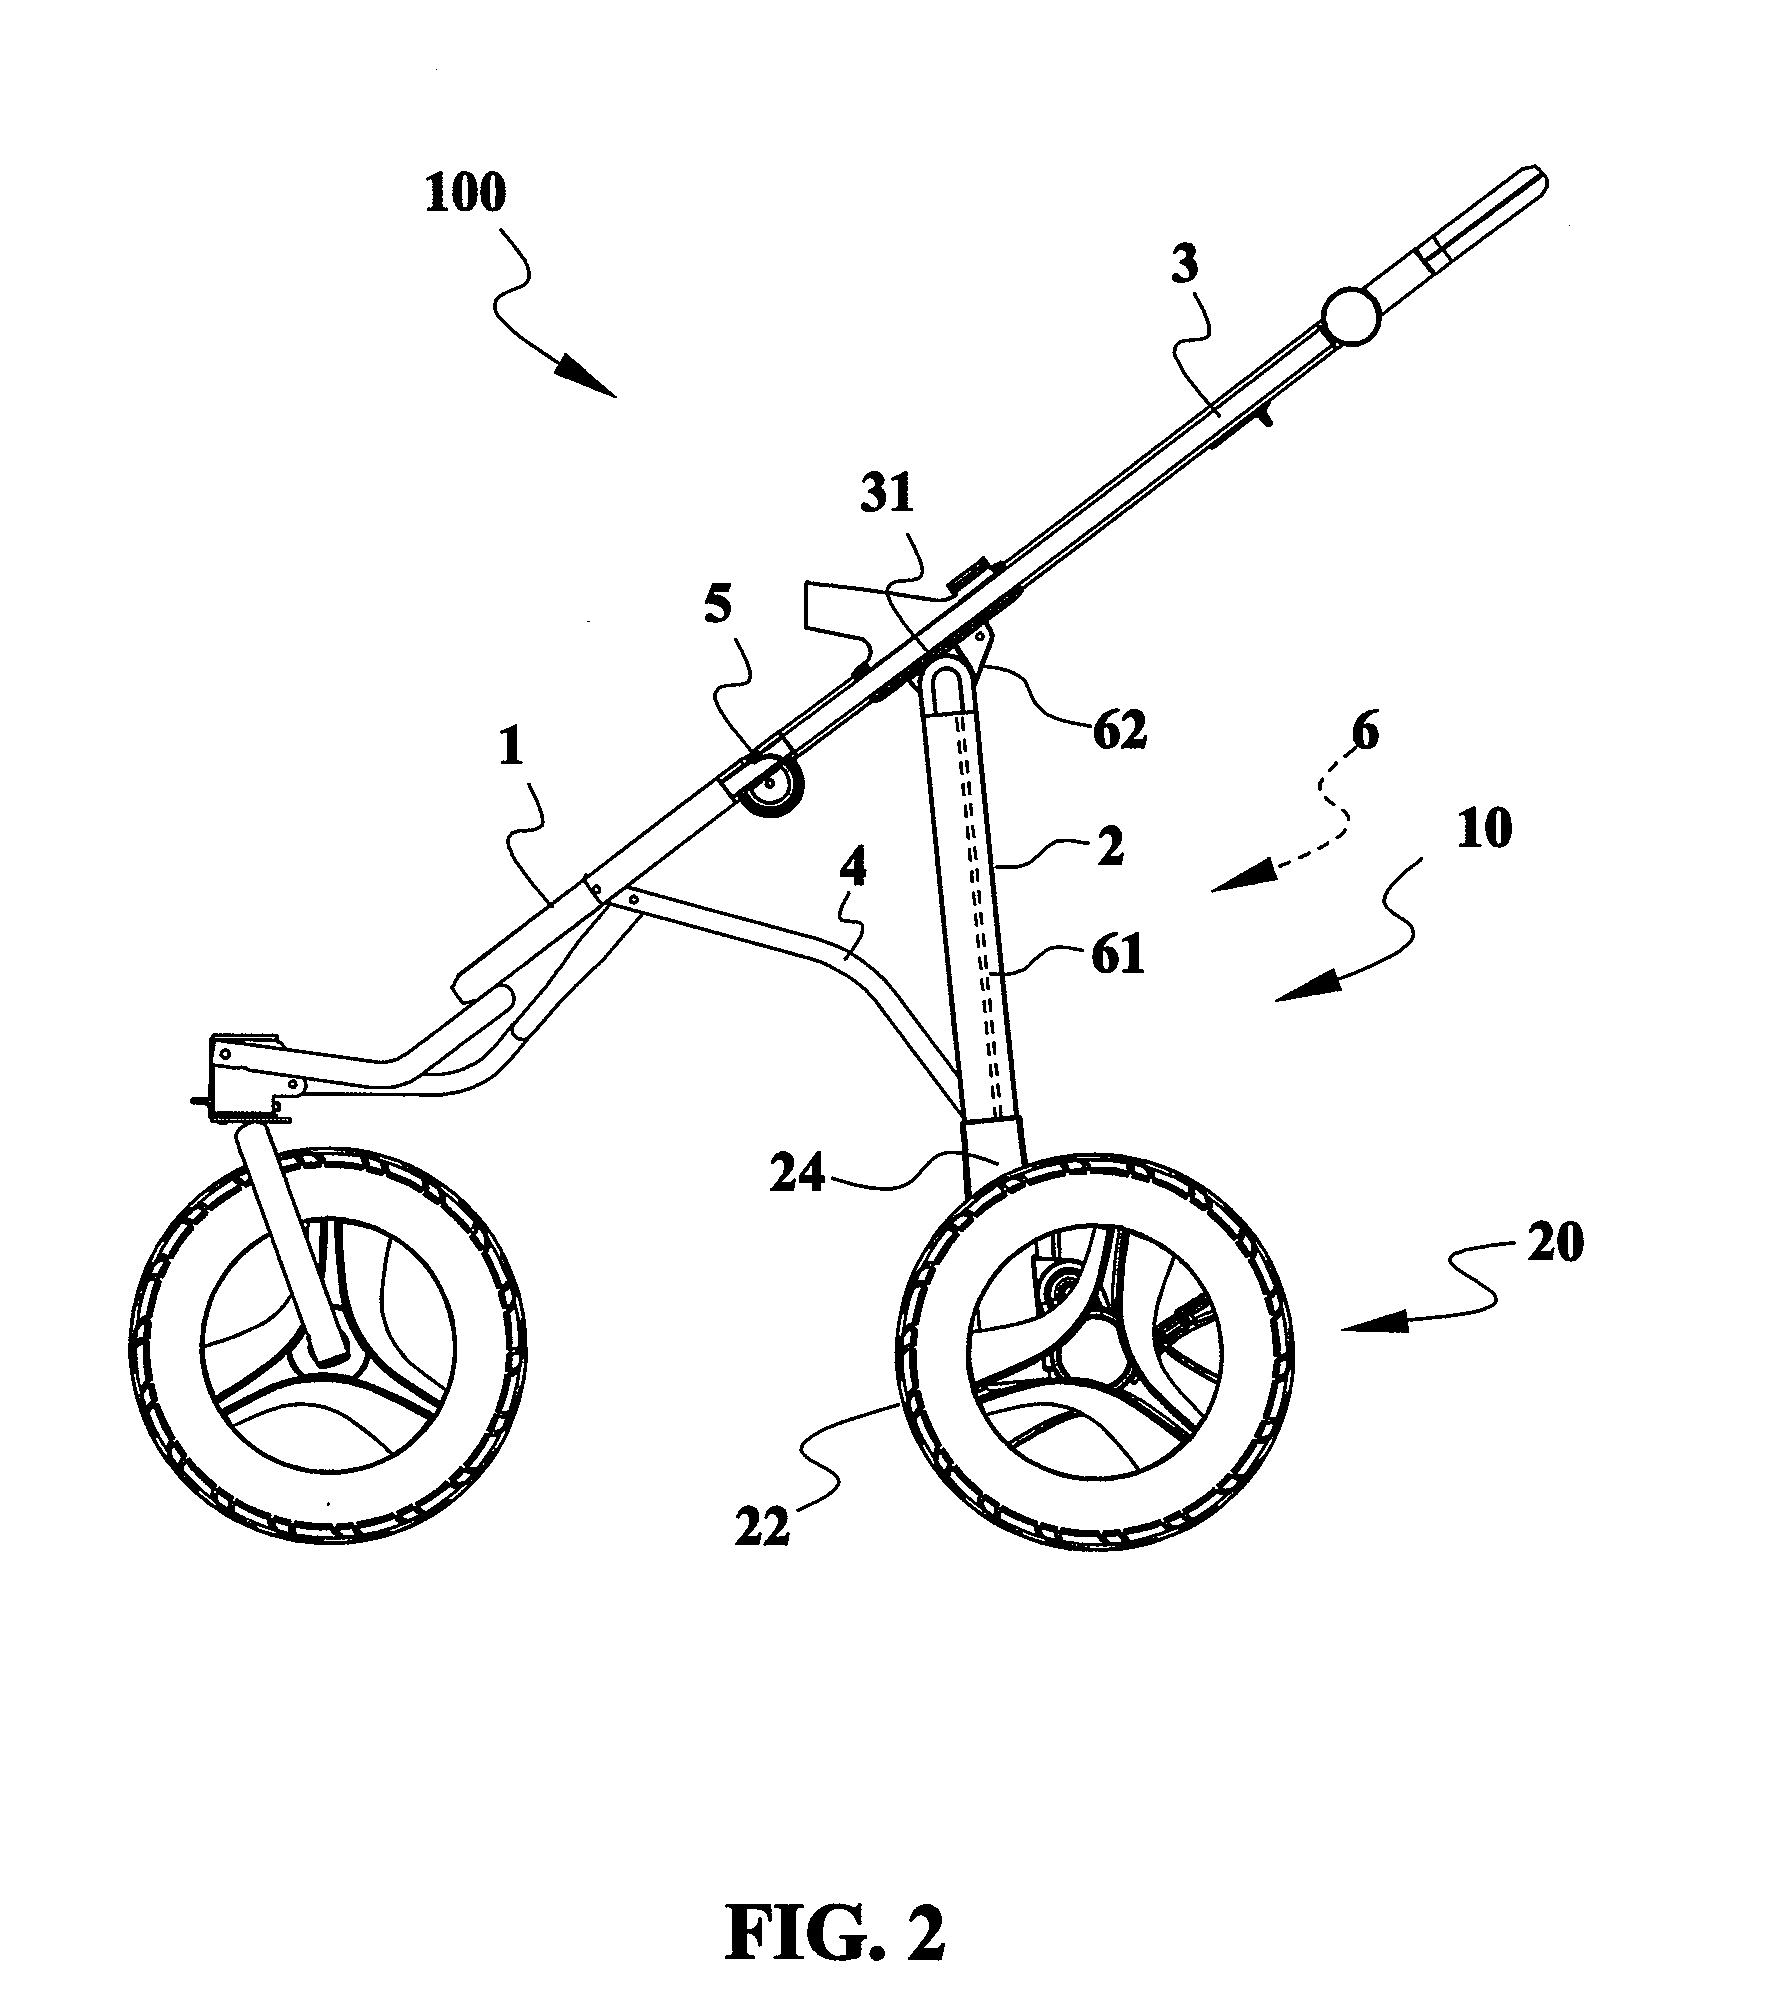 Foldable jogging stroller frame with an auto-swiveling mechanism for rear wheel sets thereof